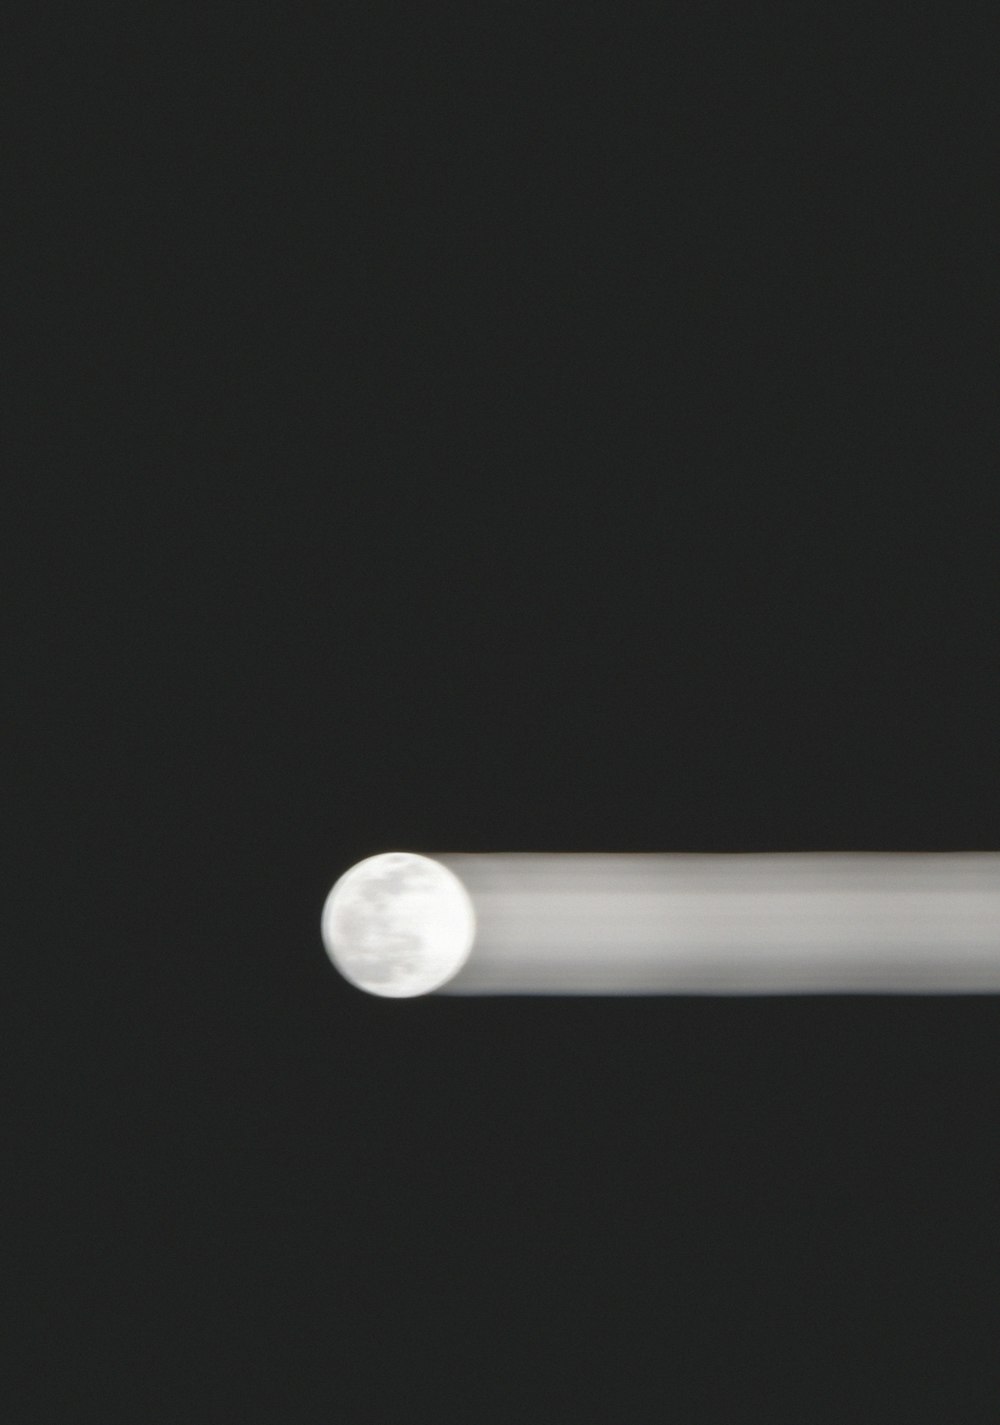 a close up of a white object on a black background